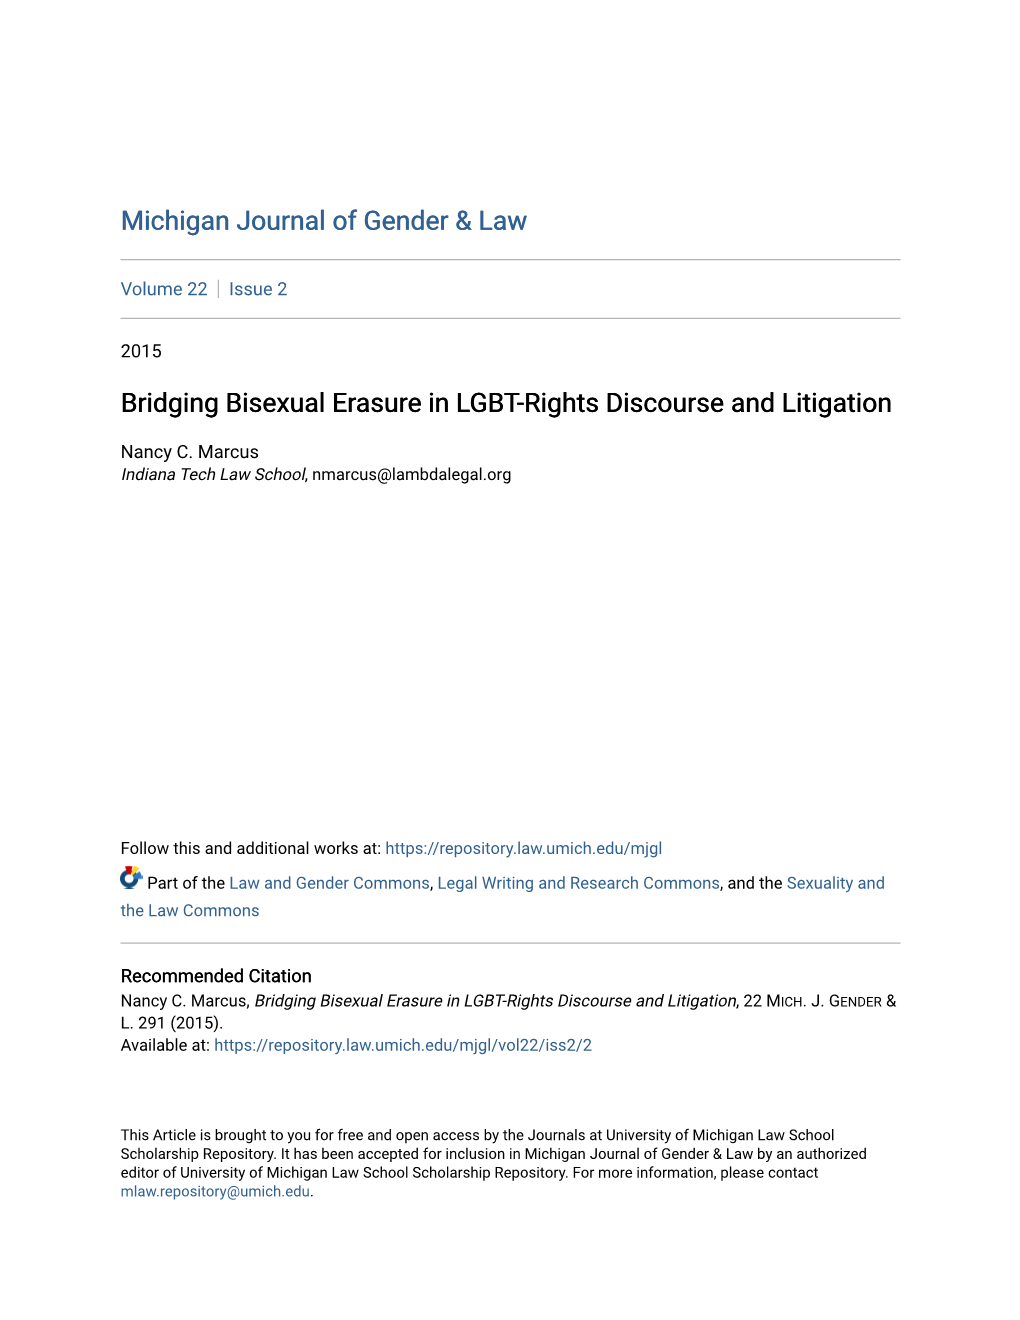 Bridging Bisexual Erasure in LGBT-Rights Discourse and Litigation